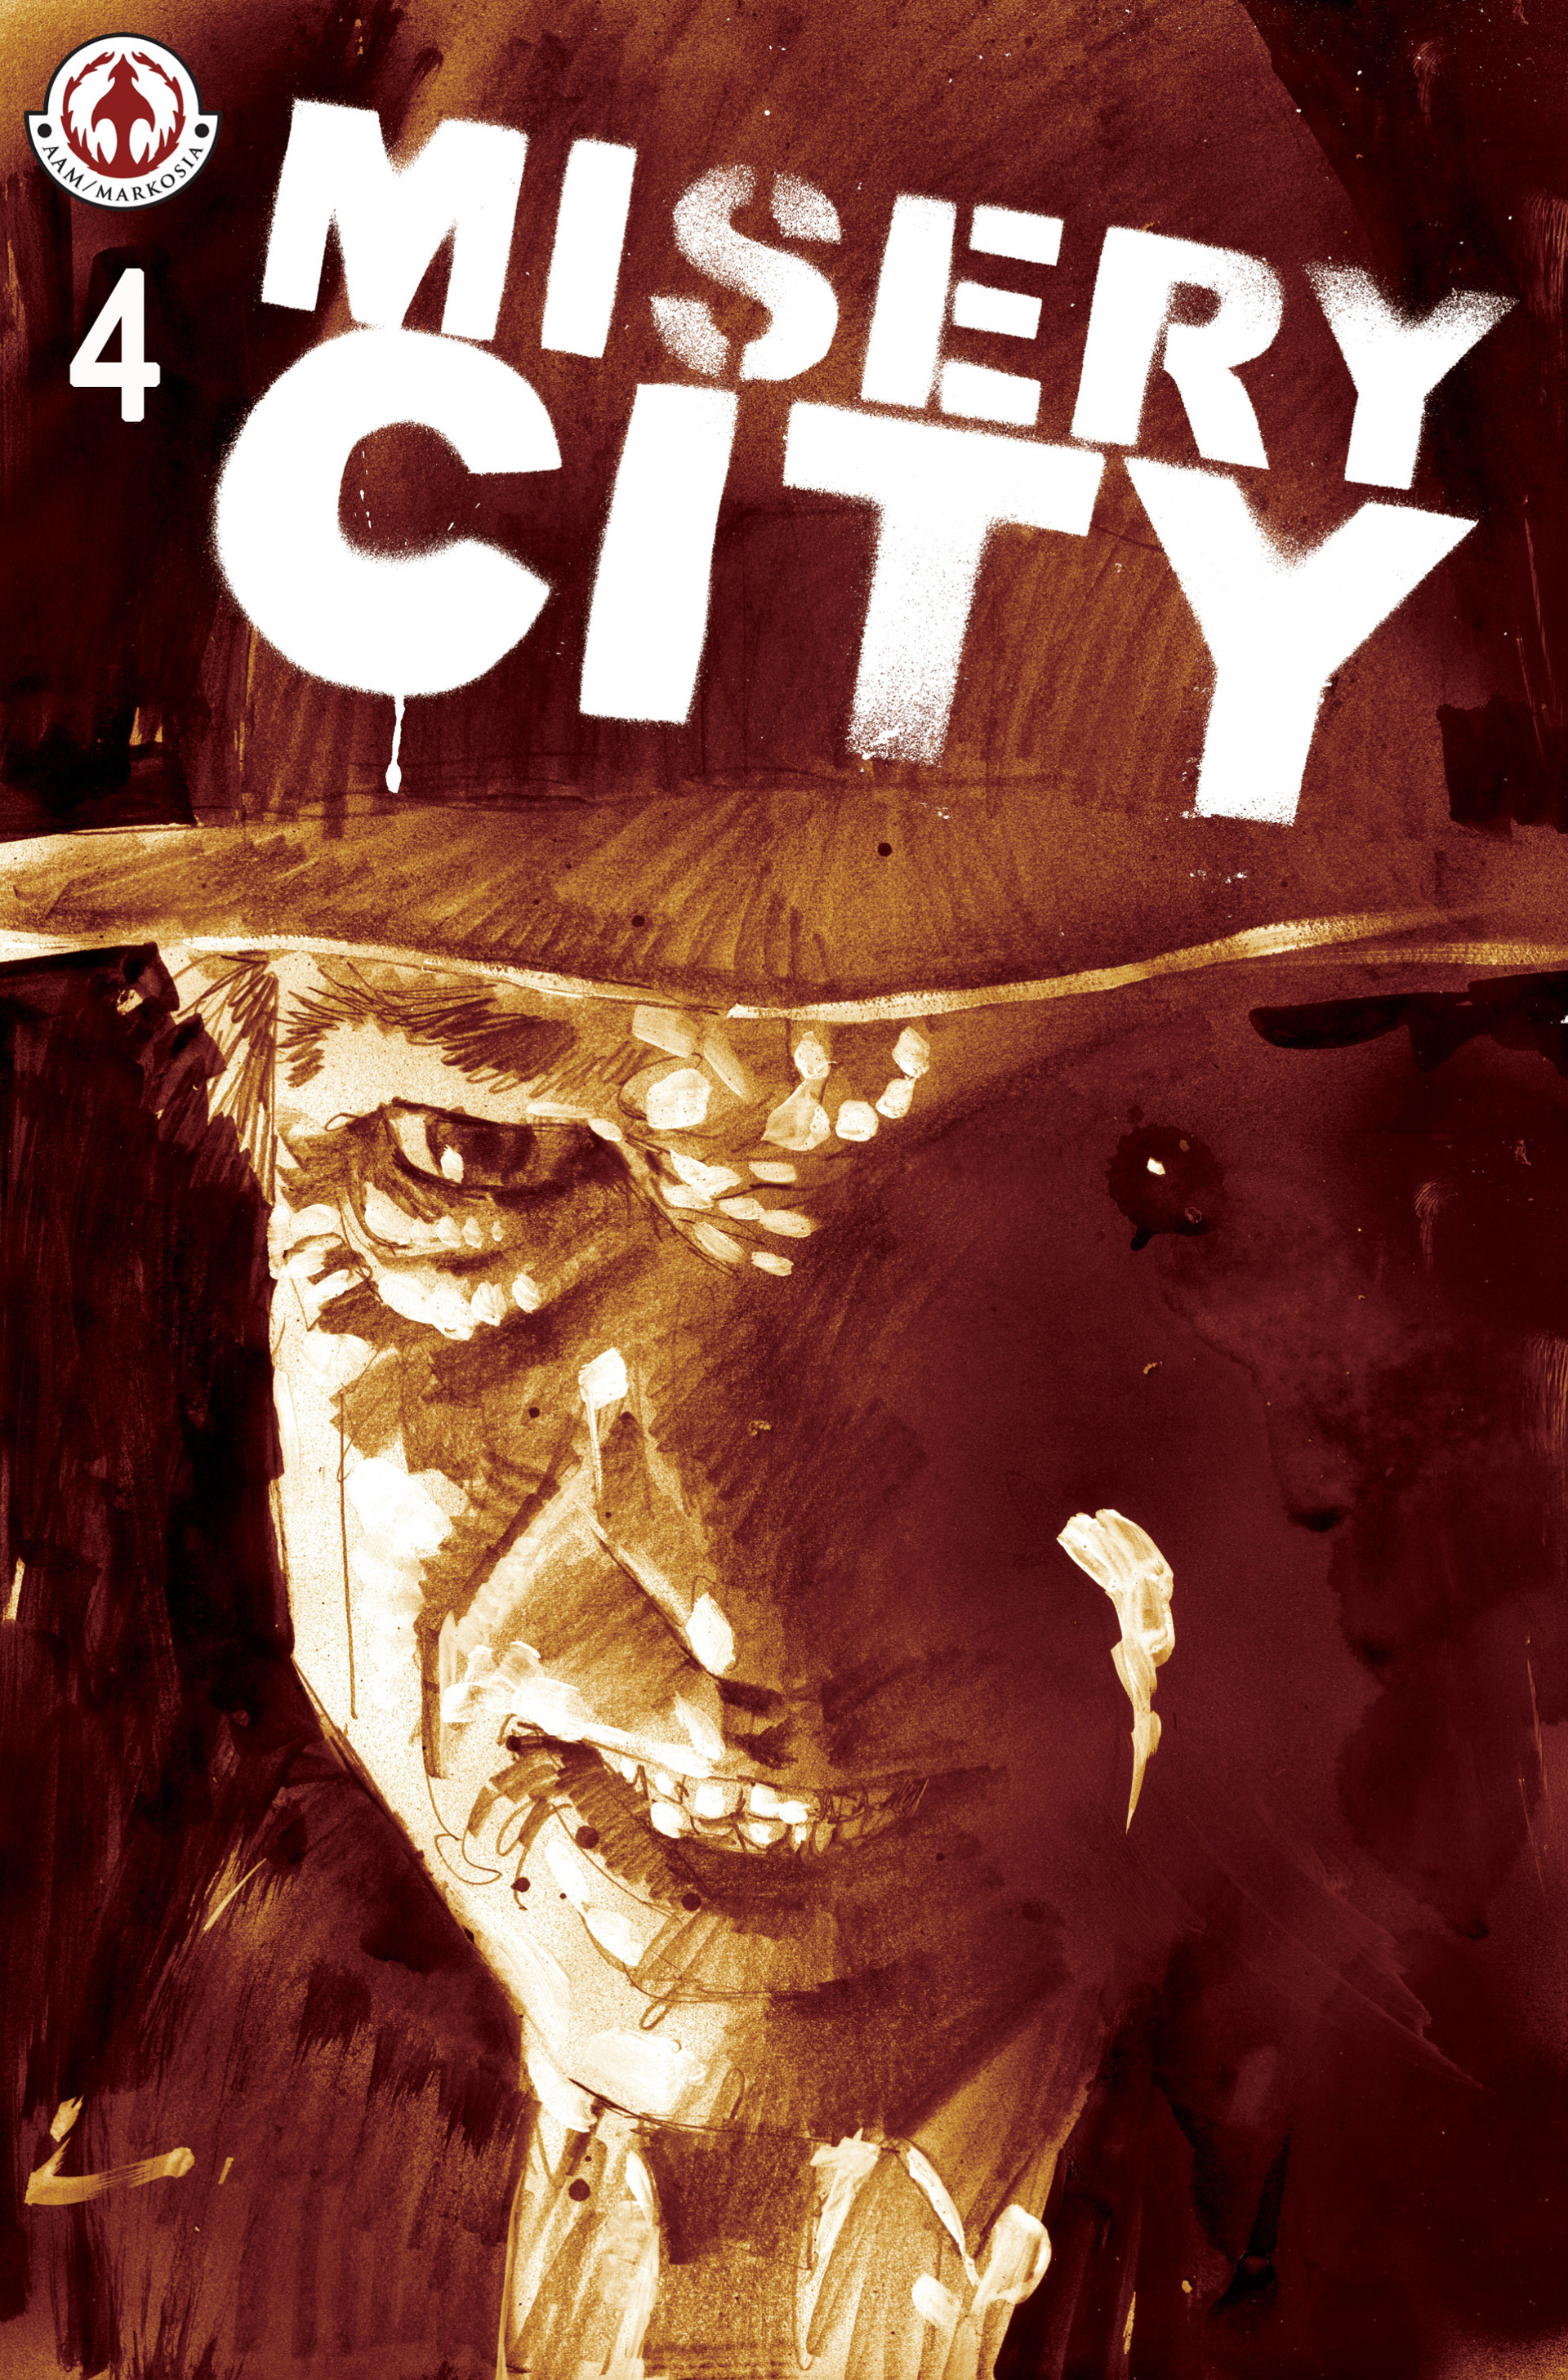 Read online Misery City comic -  Issue #4 - 1